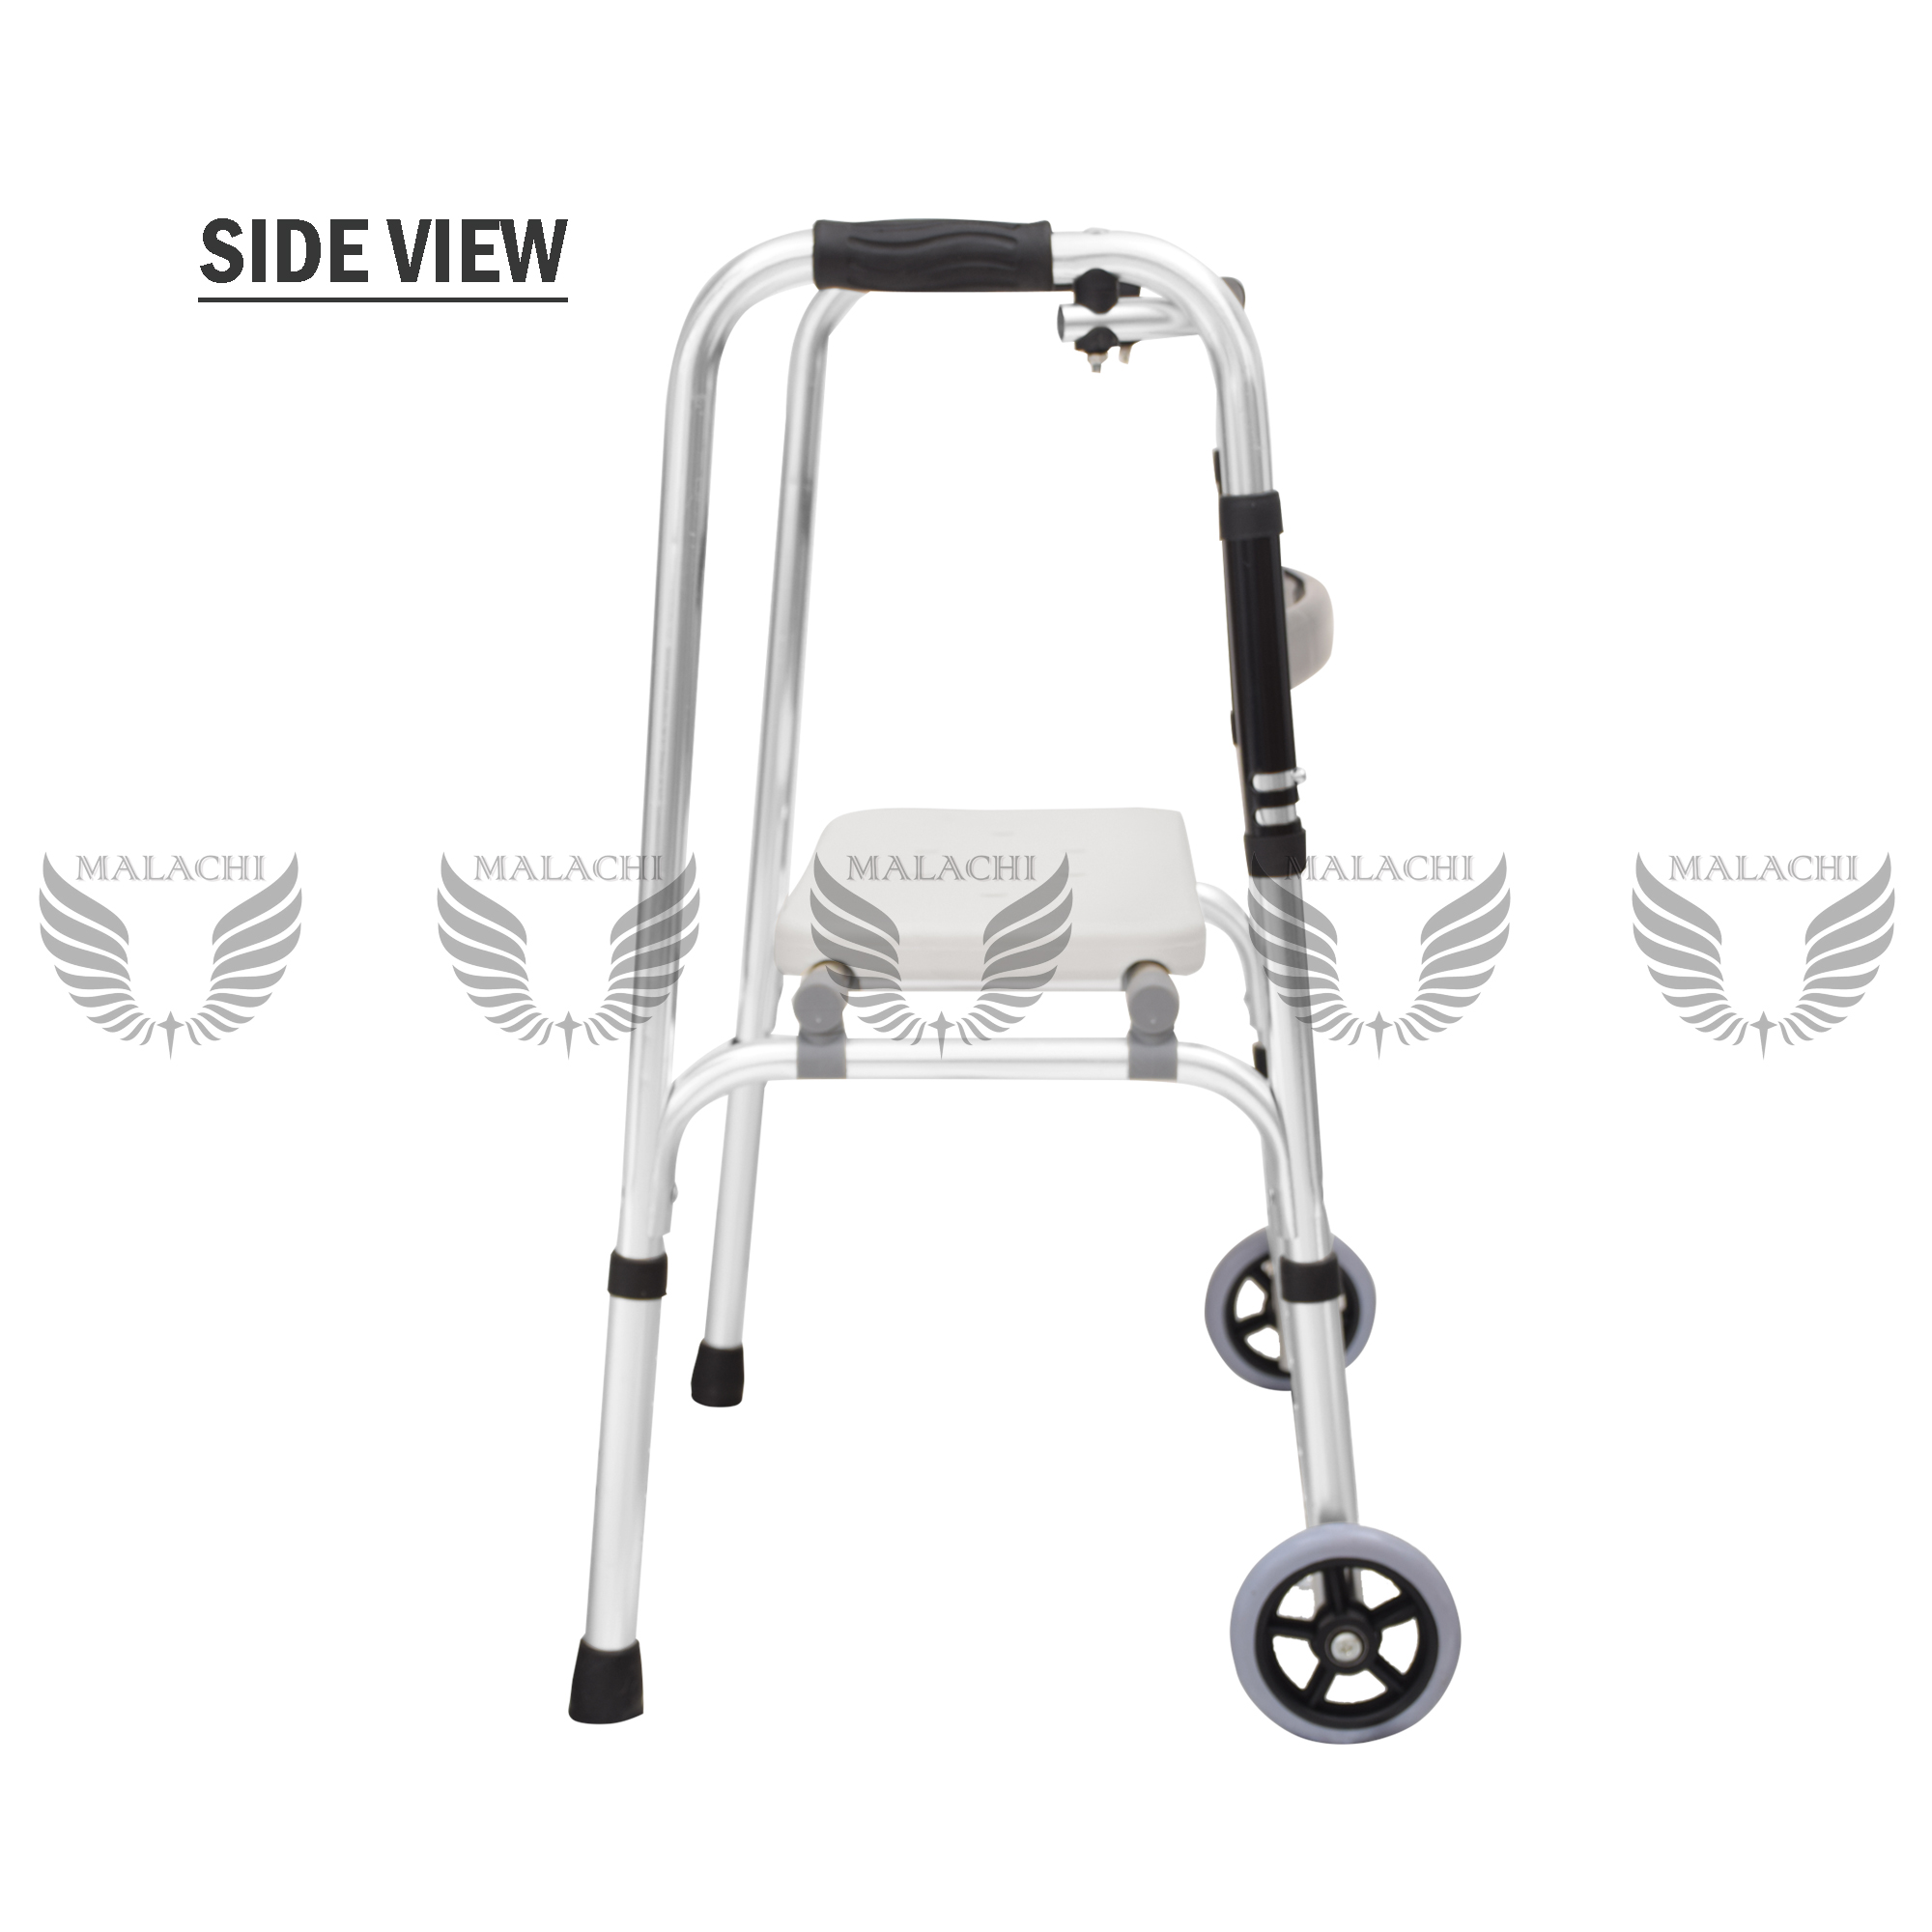 stainless steel shower chair